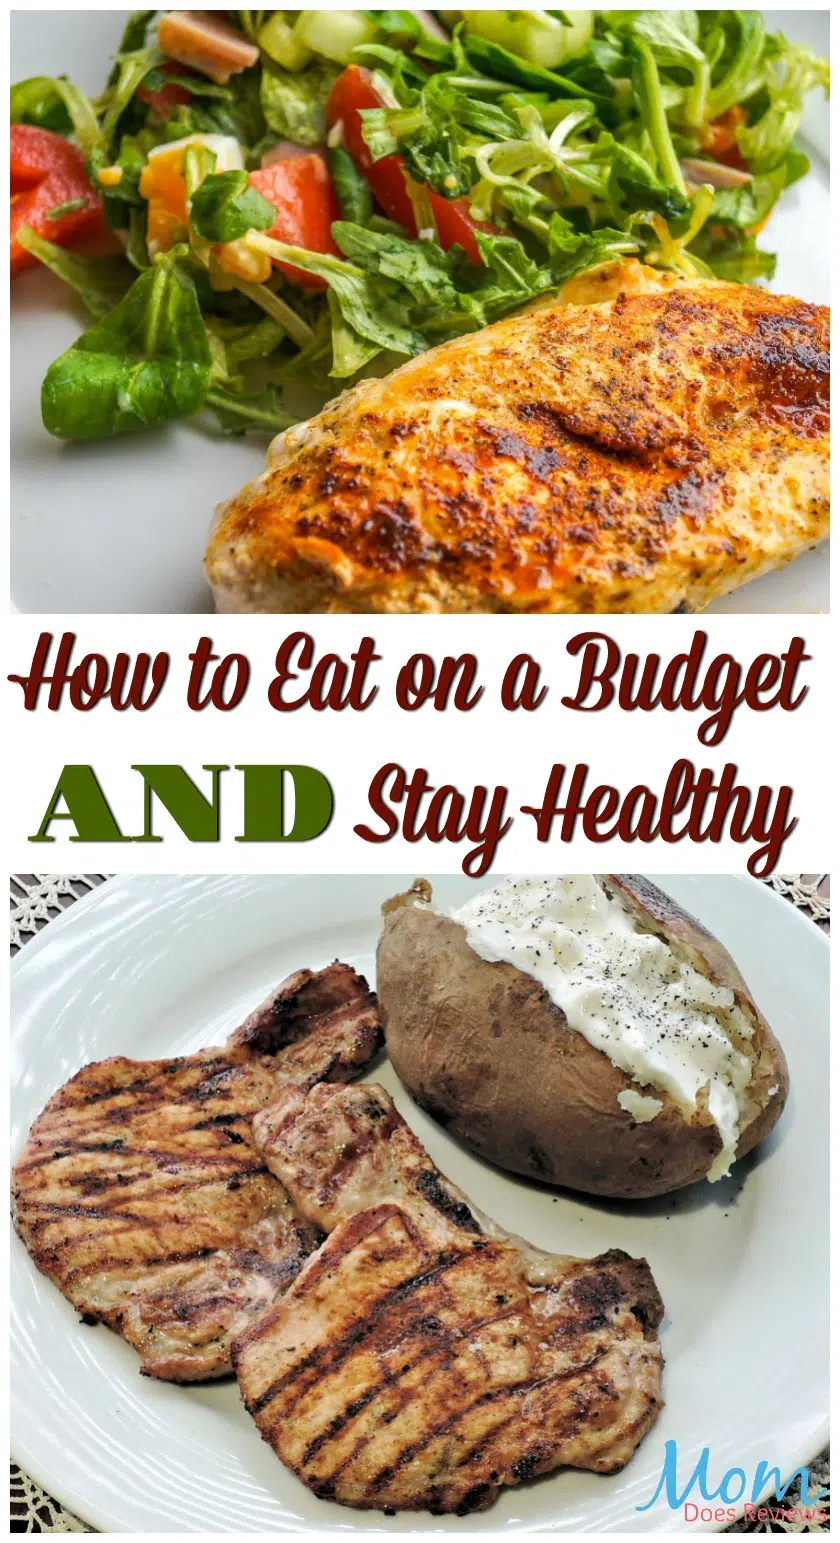 How to Eat on a Budget and Stay Healthy #food #healthy #healthyliving #eathealthy #budget #freshfood